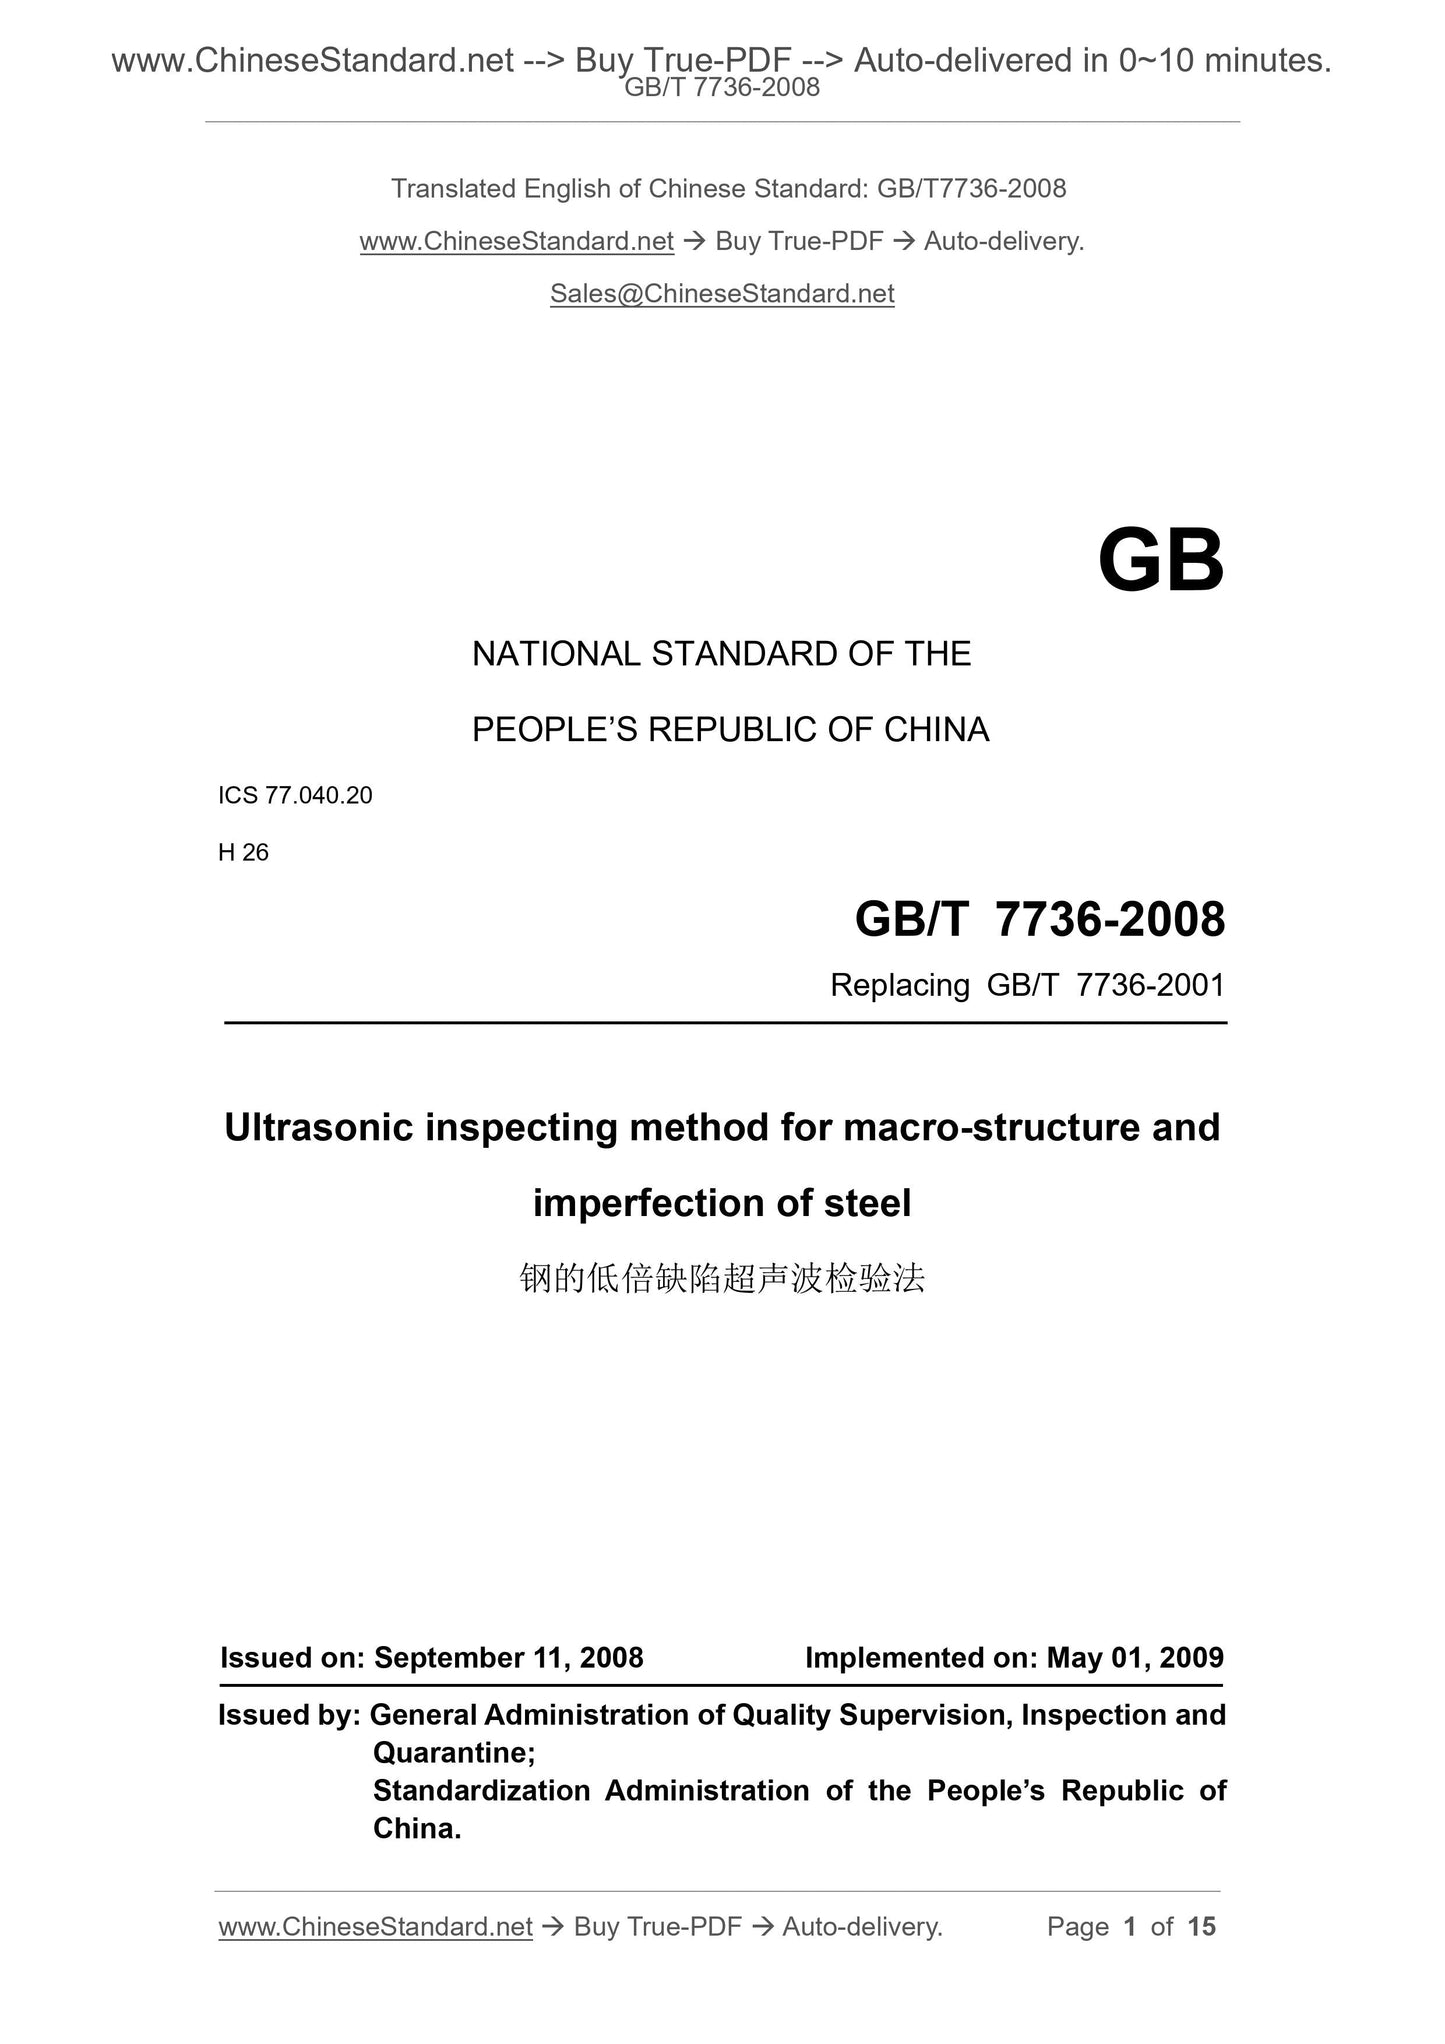 GB/T 7736-2008 Page 1